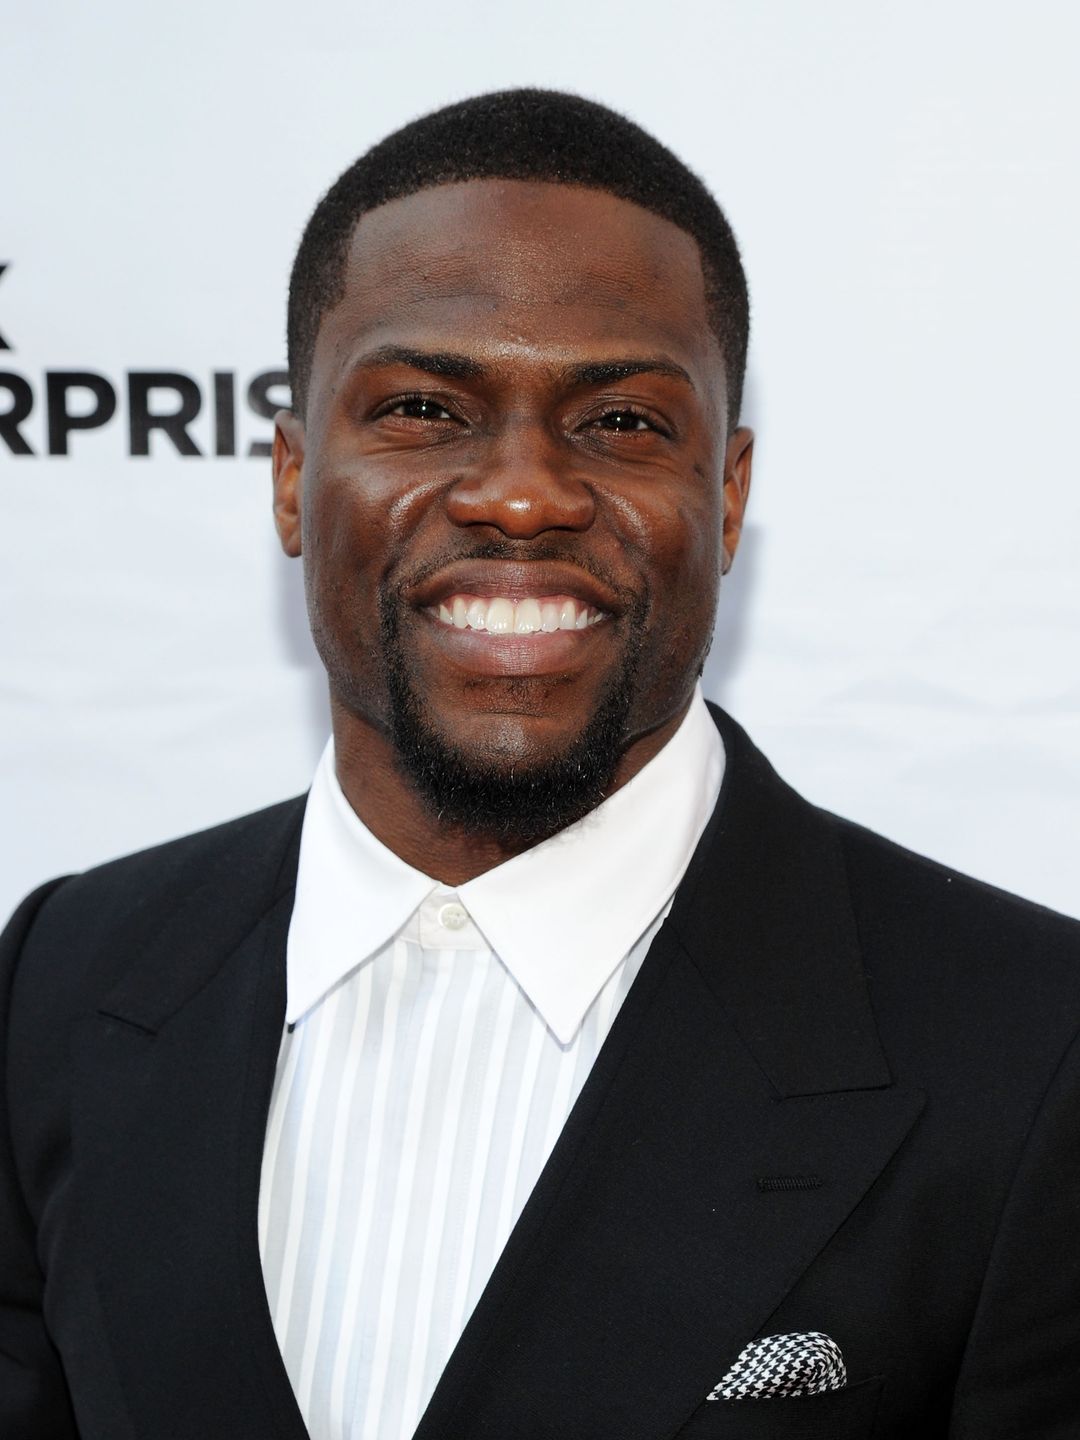 Kevin Hart does he have a wife